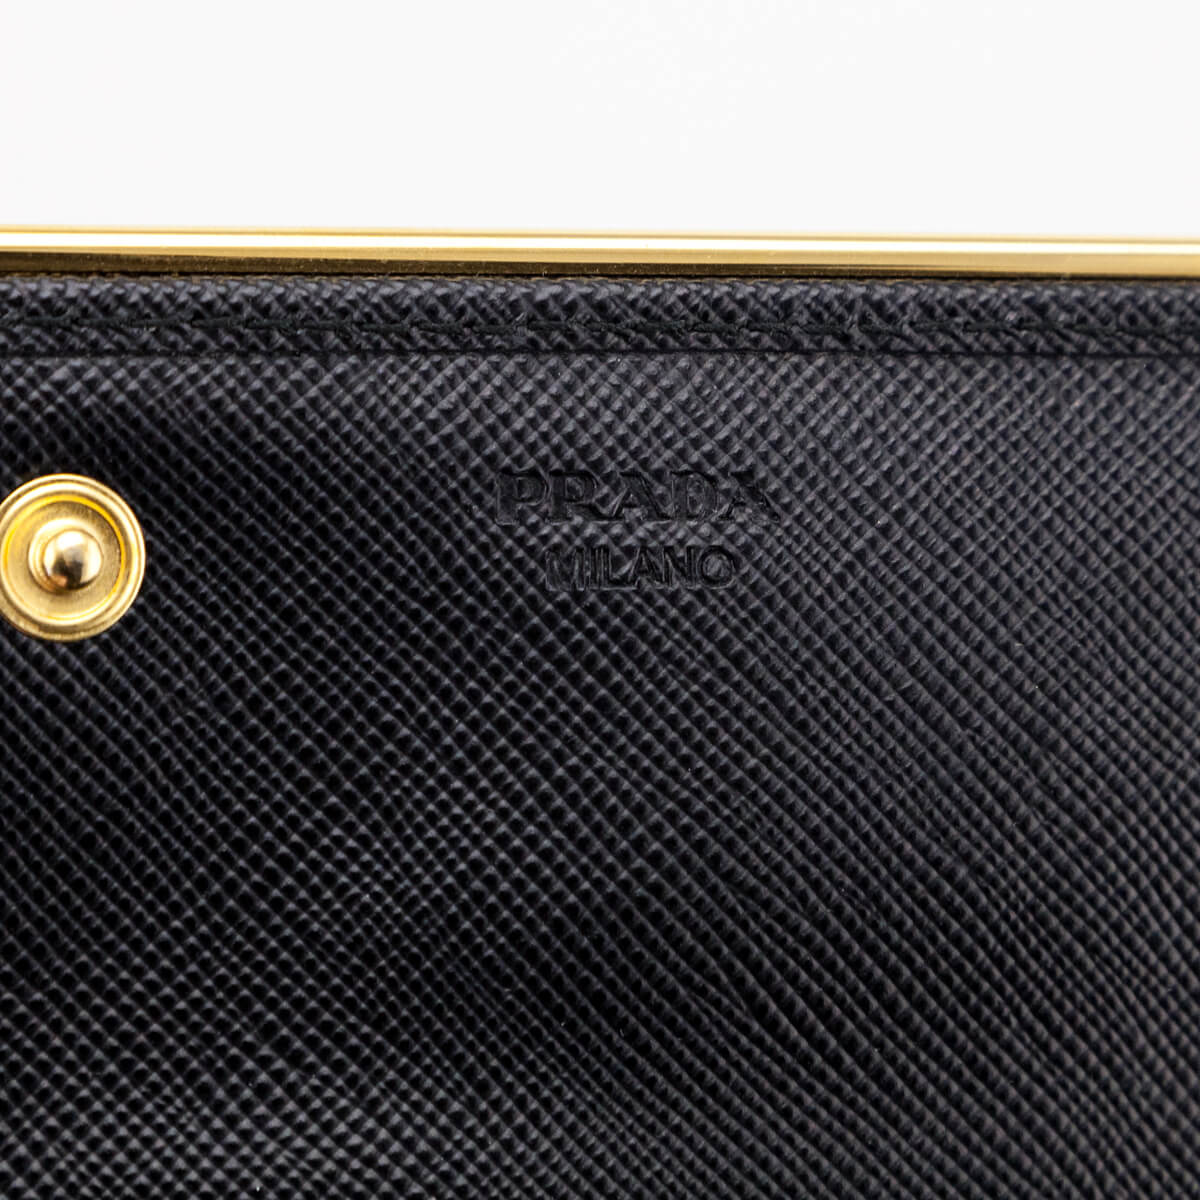 PRADA Saffiano Leather Flap Wallet With Metal Bar Detail, Luxury